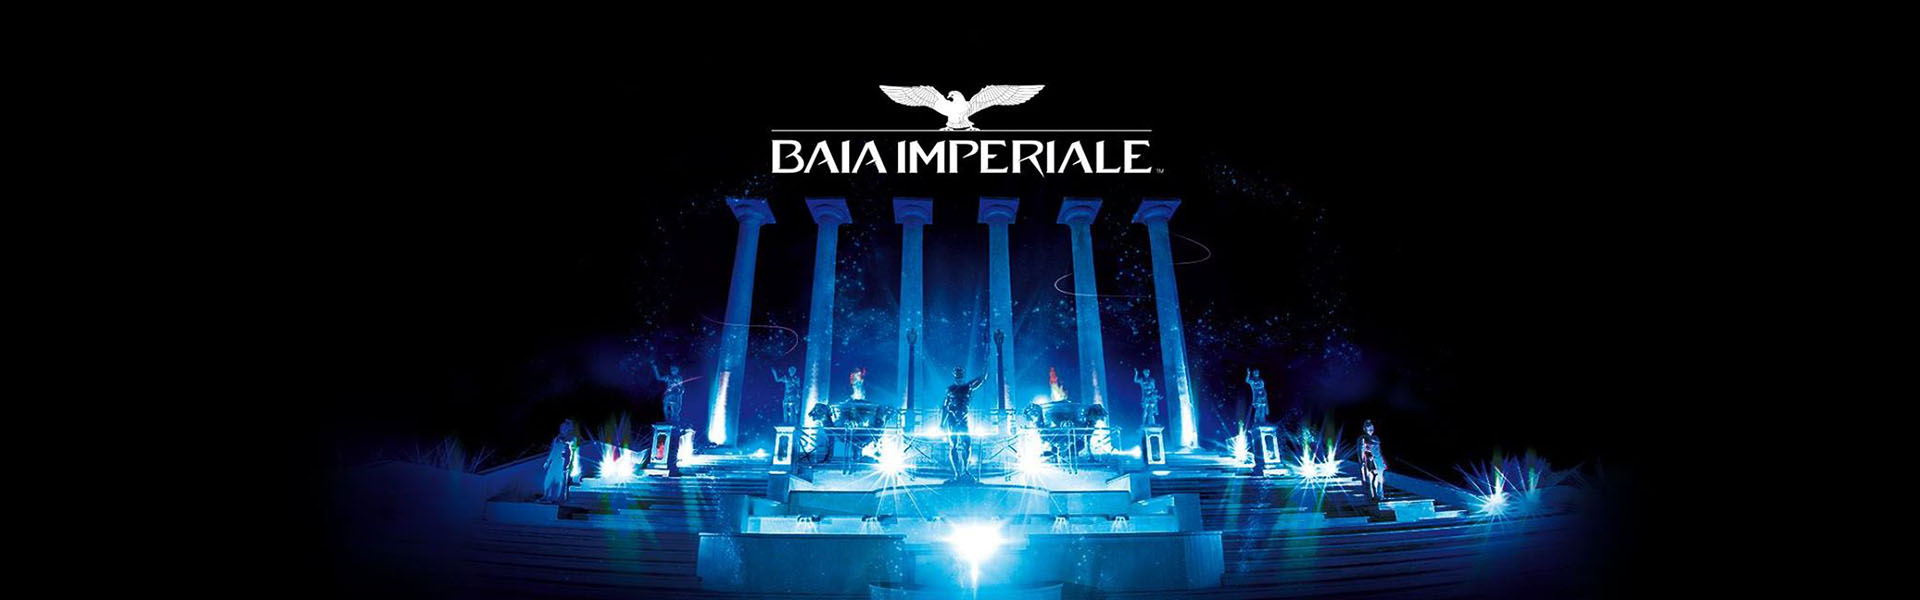 Baia Imperiale, Fucking Friday, guest Moreno